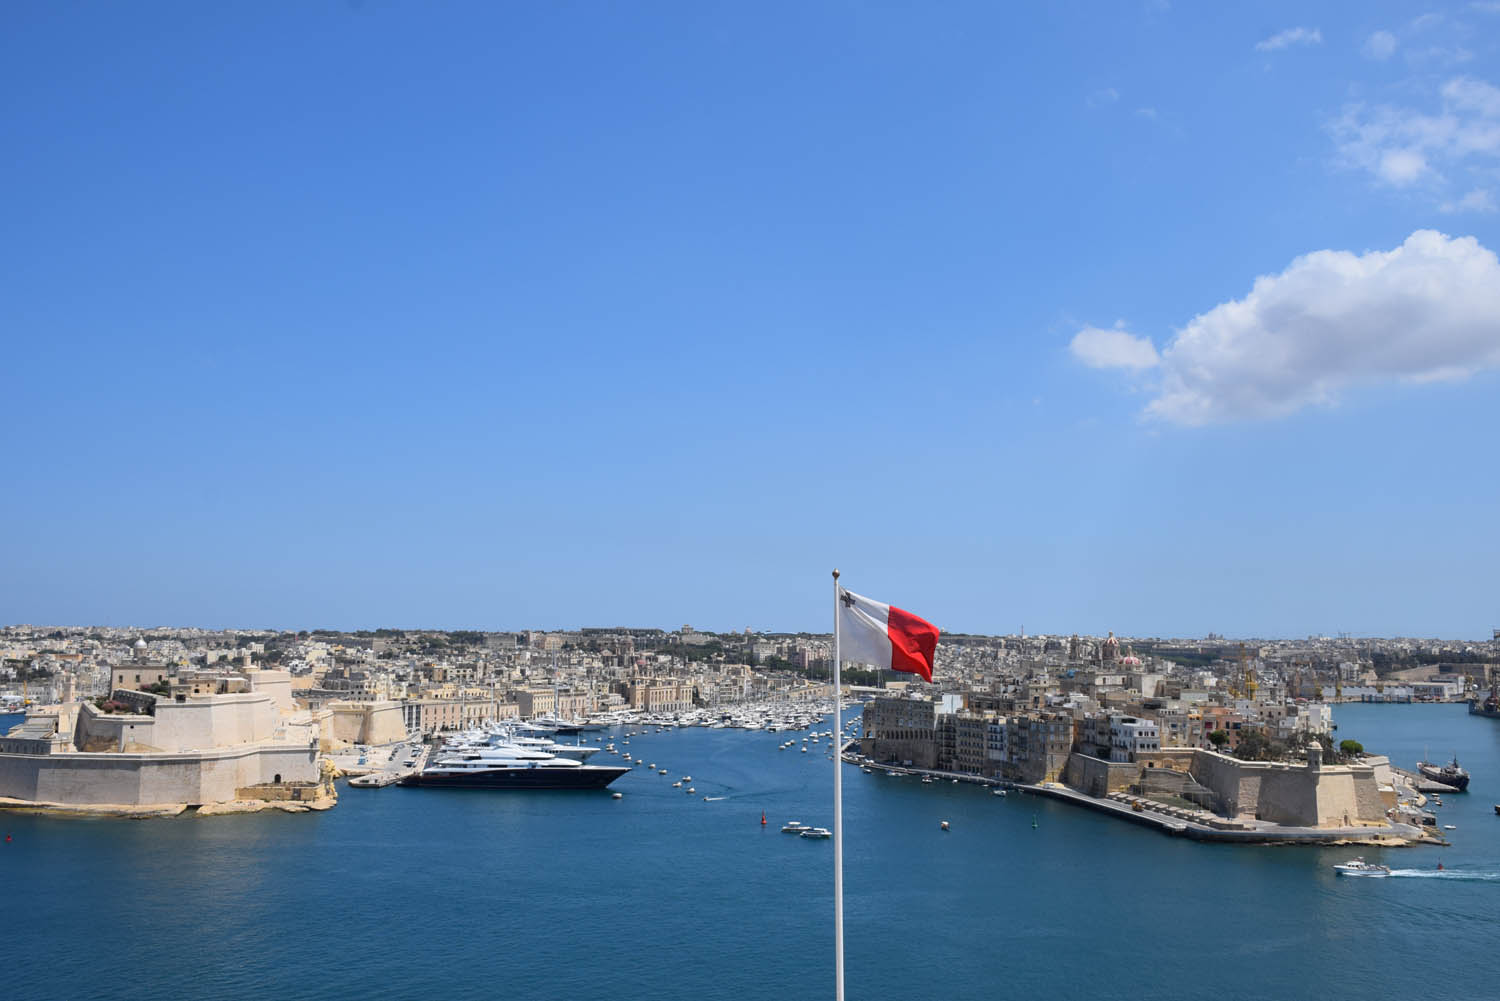 Flag of Malta, which has the cross of St. George - View of the Upper Barrakka Gardens in Valletta